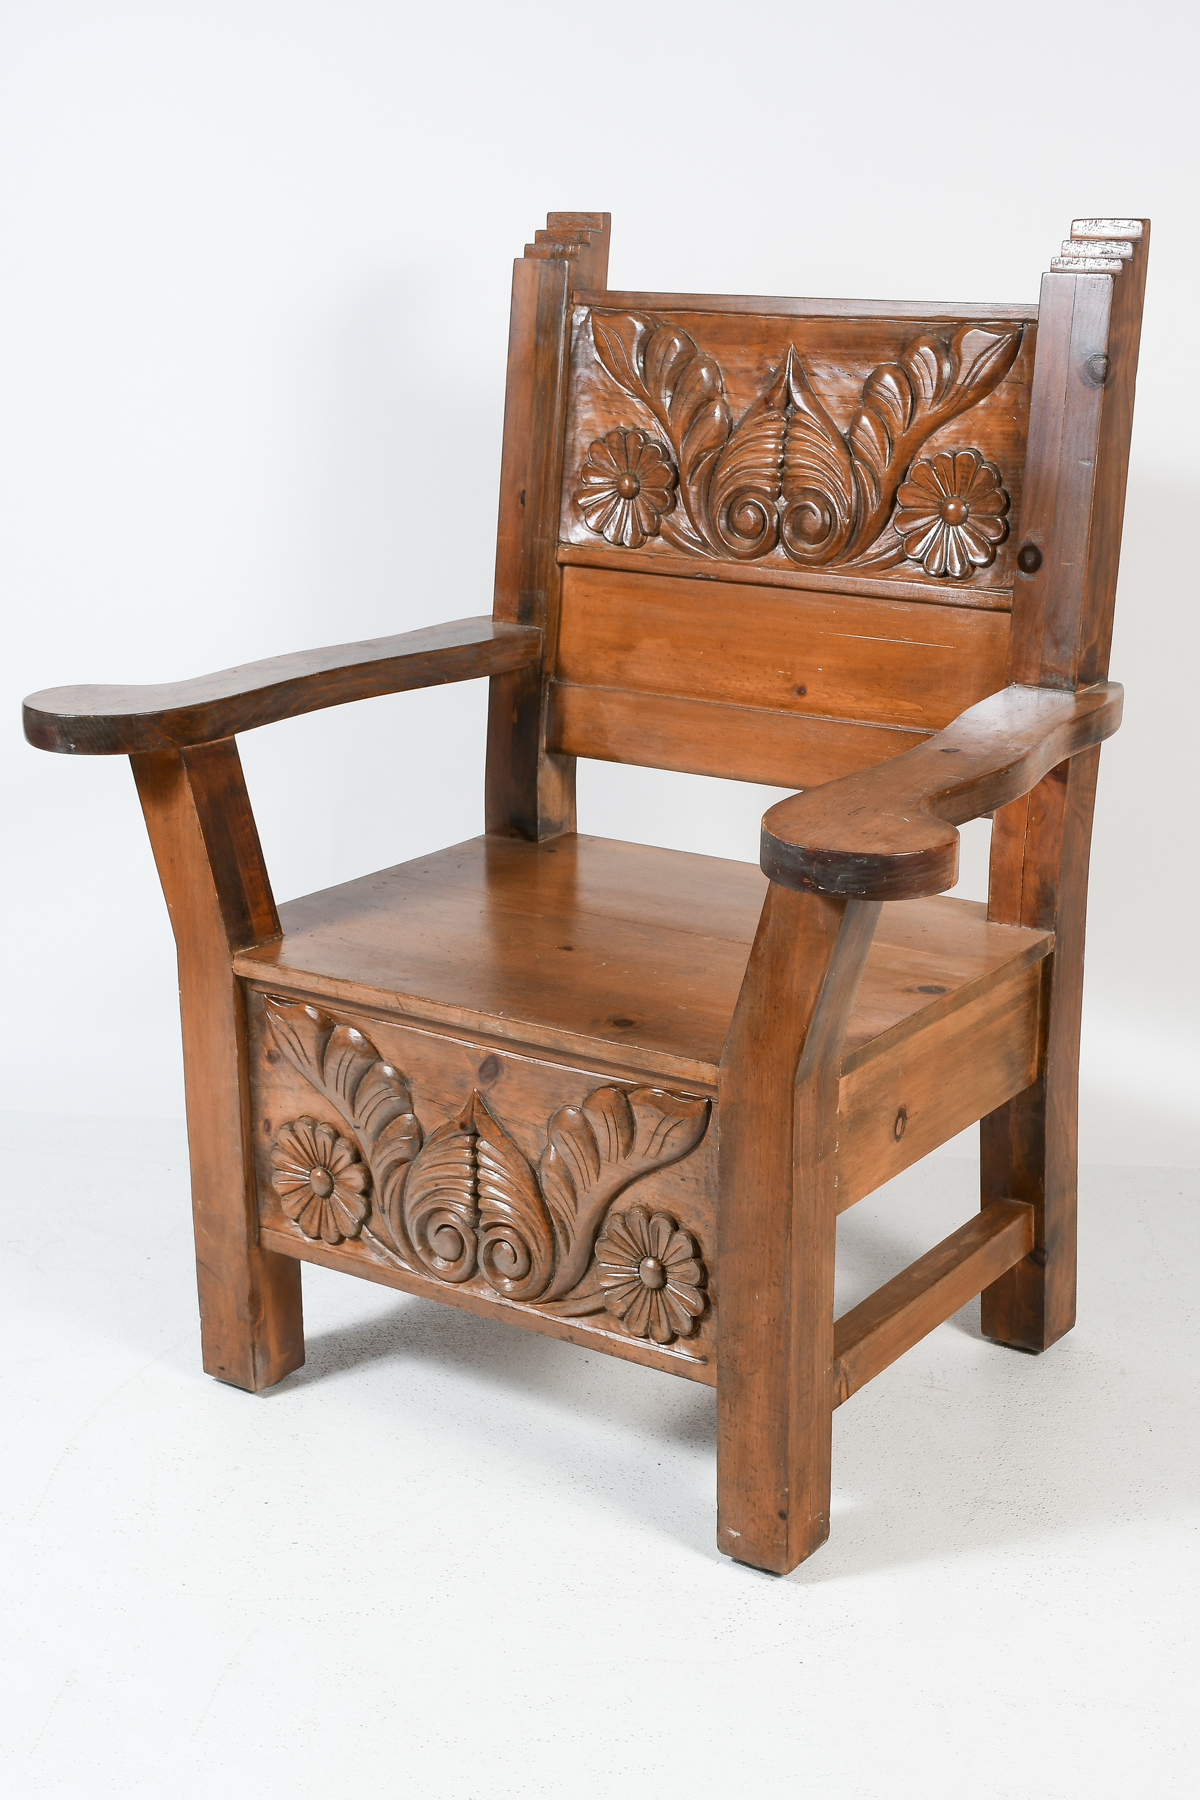 CARVED MEXICAN PINE CHAIR: Solid